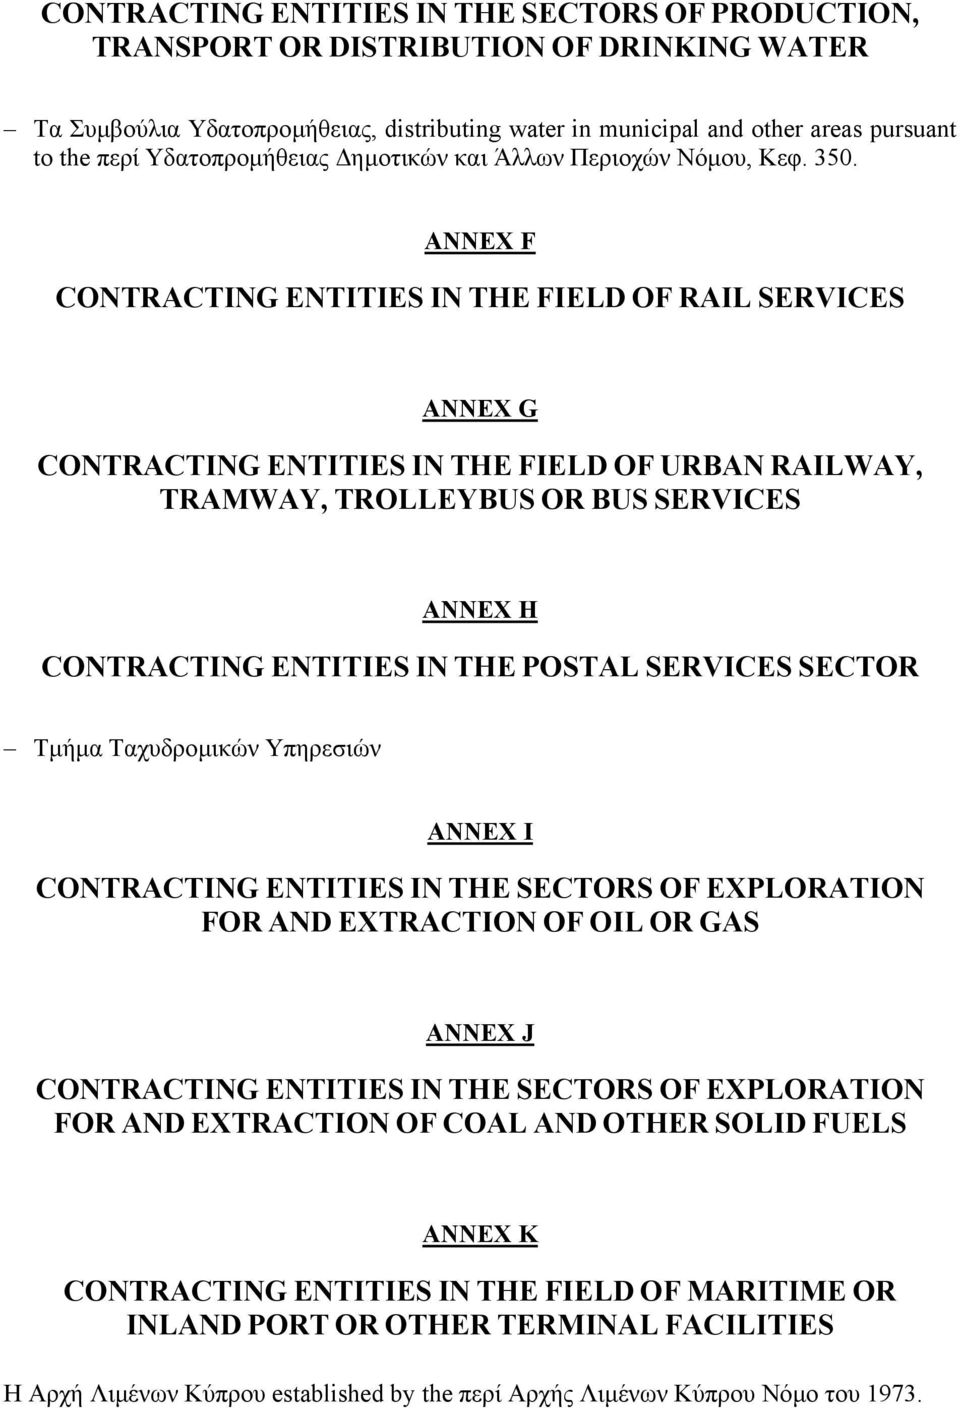 ANNEX F CONTRACTING ENTITIES IN THE FIELD OF RAIL SERVICES ANNEX G CONTRACTING ENTITIES IN THE FIELD OF URBAN RAILWAY, TRAMWAY, TROLLEYBUS OR BUS SERVICES ANNEX H CONTRACTING ENTITIES IN THE POSTAL